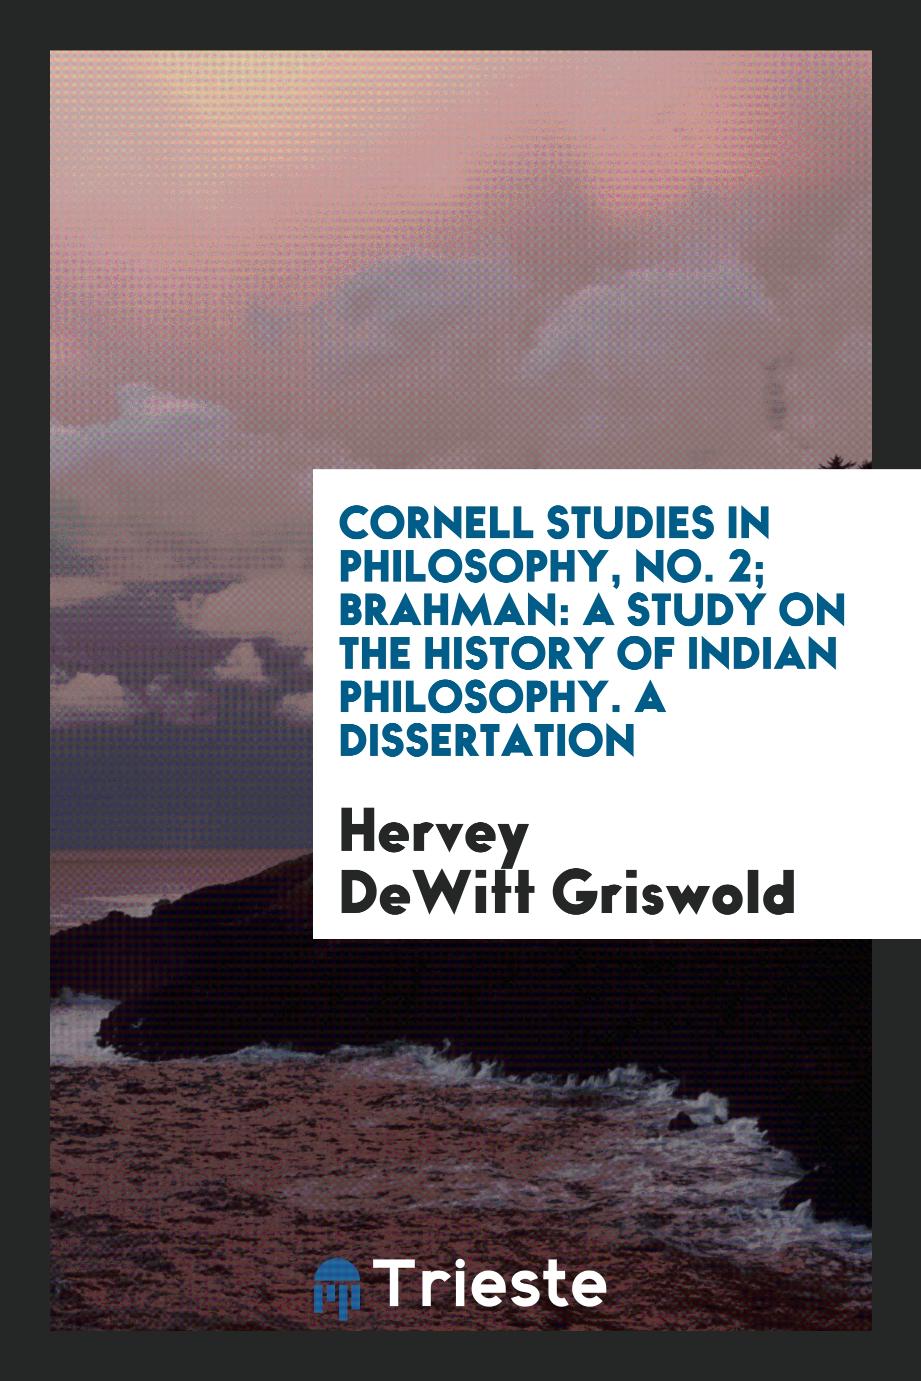 Cornell Studies in Philosophy, No. 2; Brahman: A Study on the History of Indian Philosophy. A Dissertation